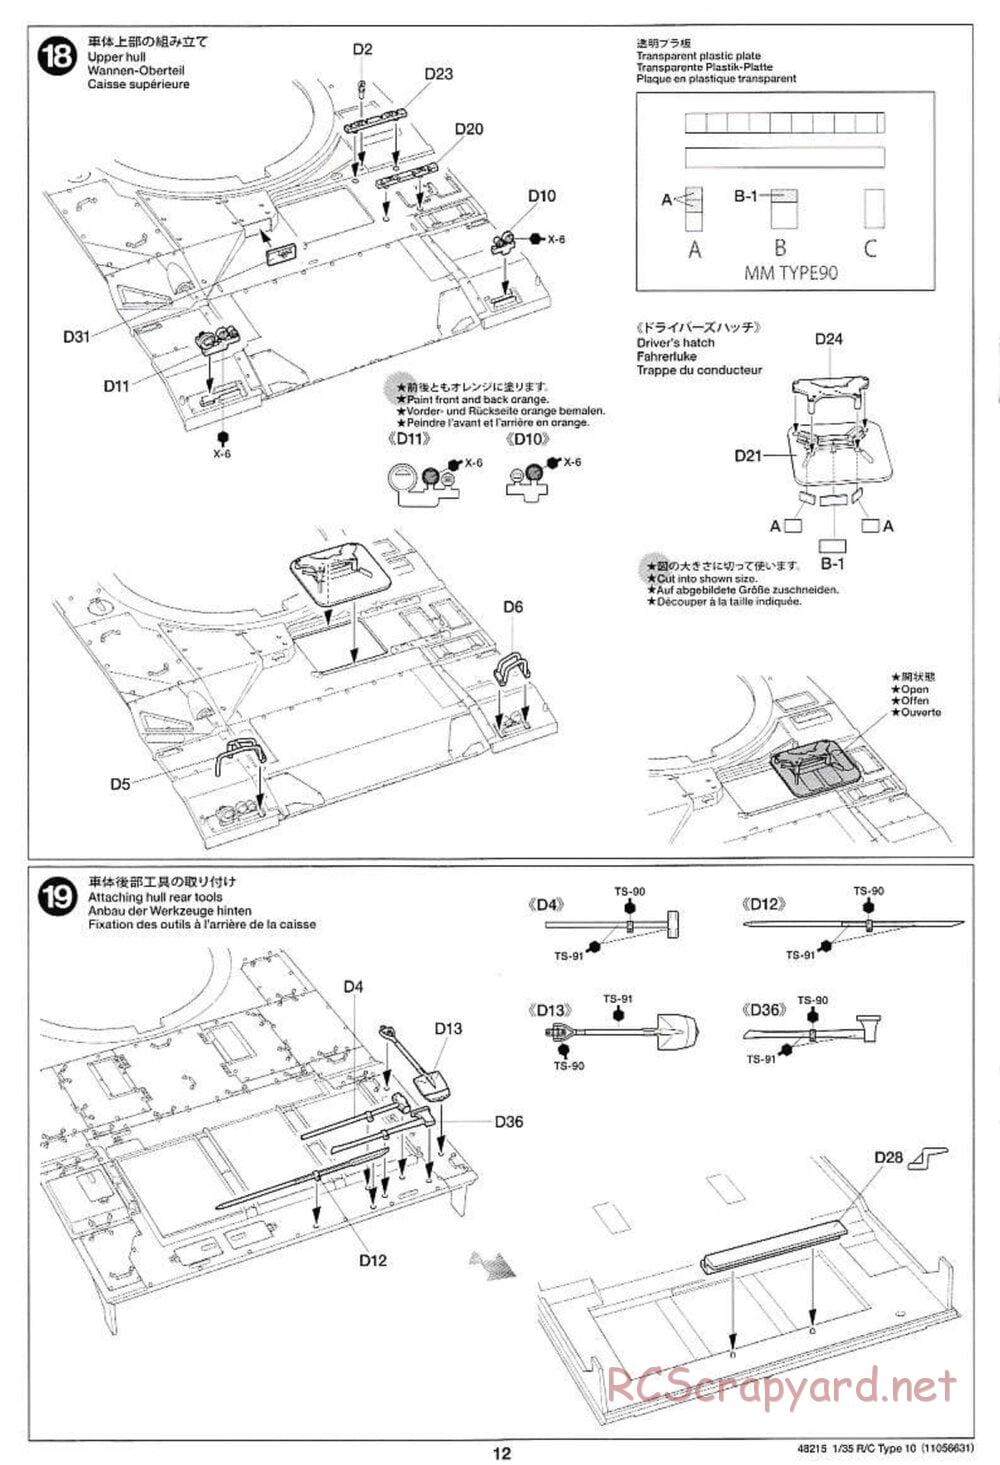 Tamiya - JGSDF Type 10 Tank - 1/35 Scale Chassis - Manual - Page 12